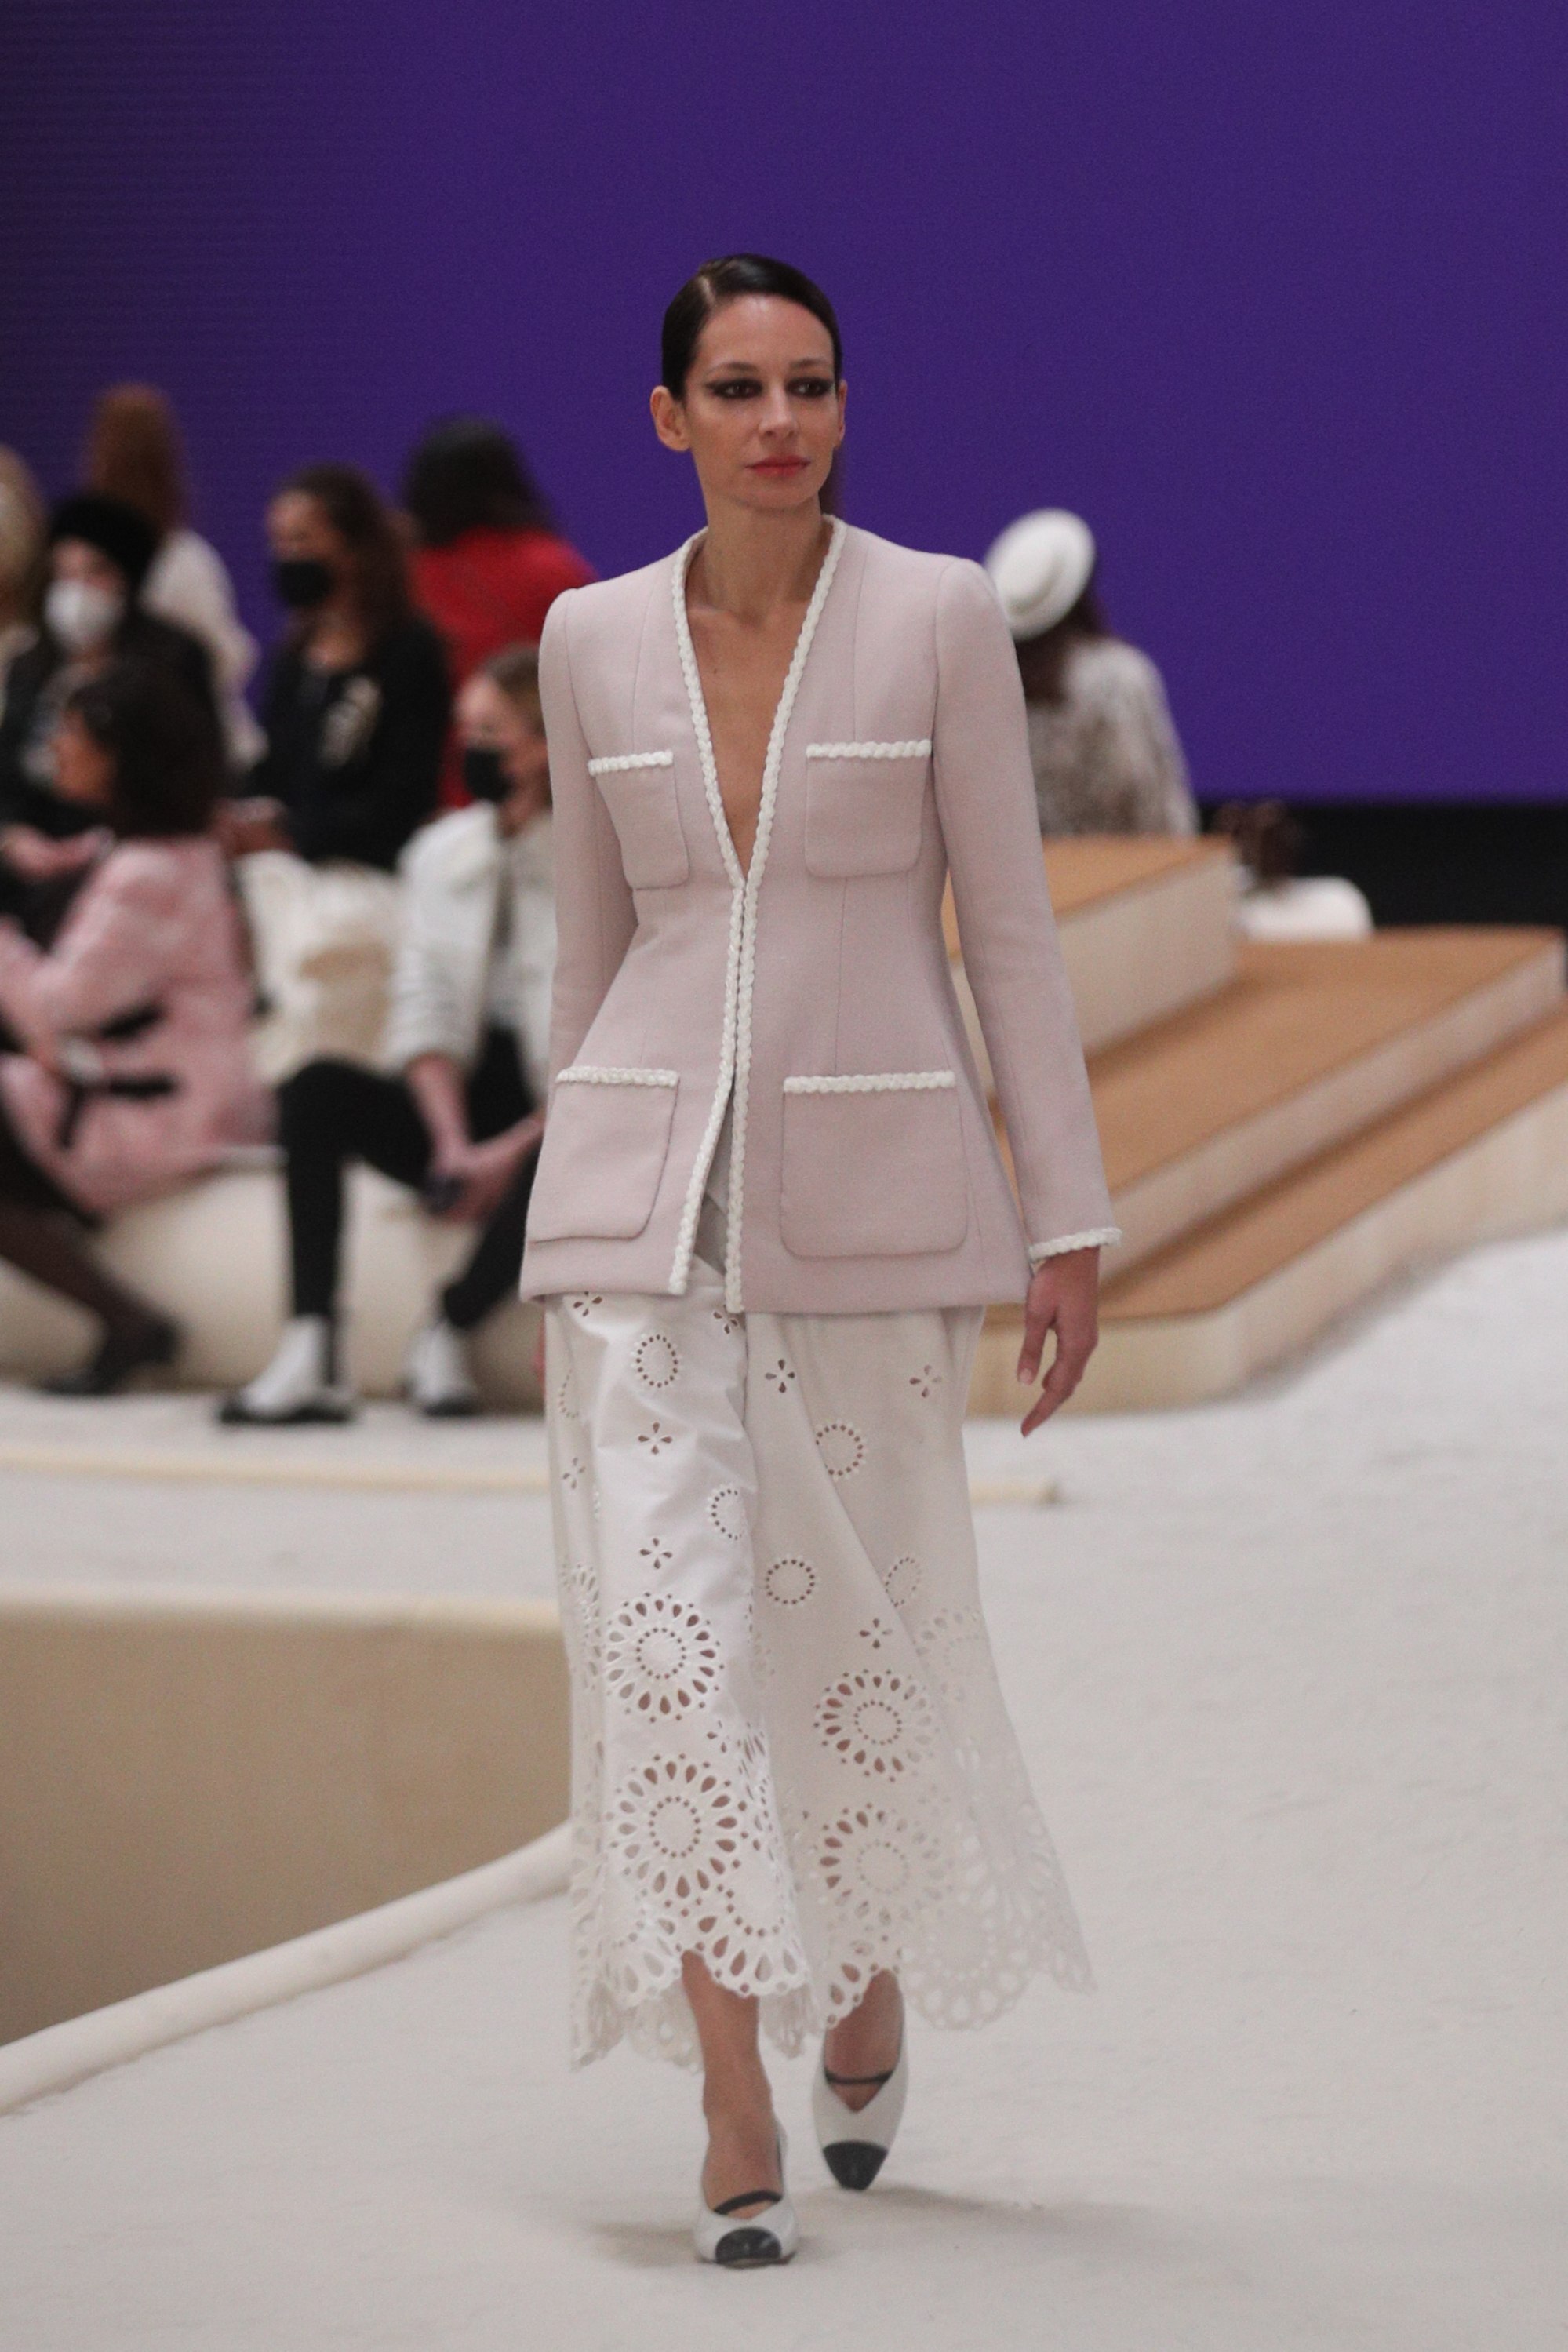 Chanel Unveiled Their Haute Couture Collection In Paris